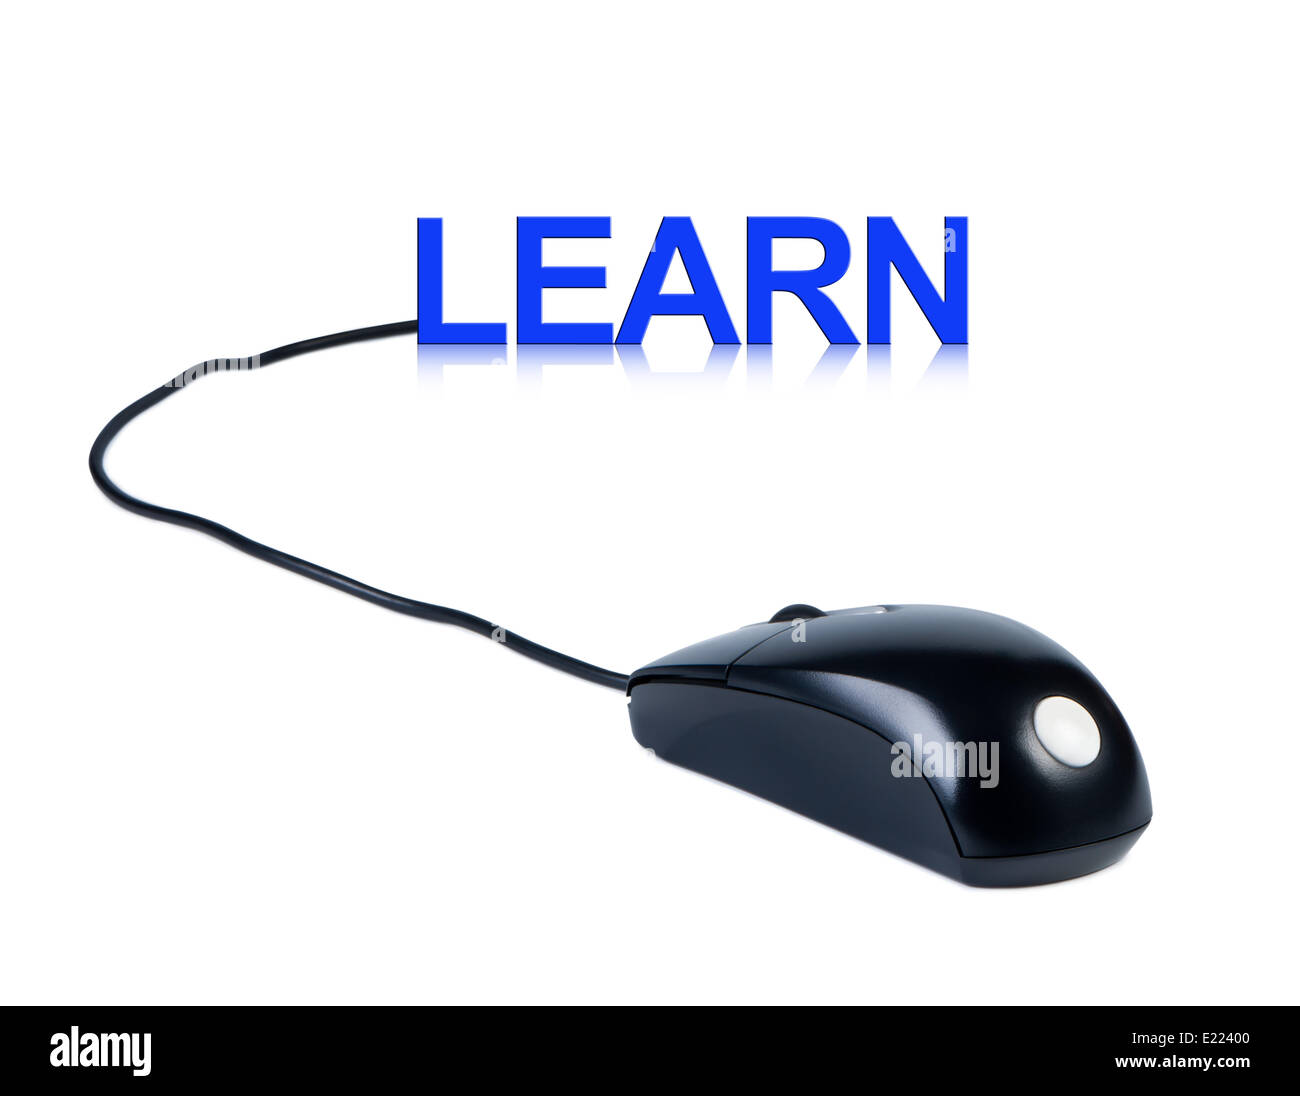 Computer mouse and word Learn. Stock Photo